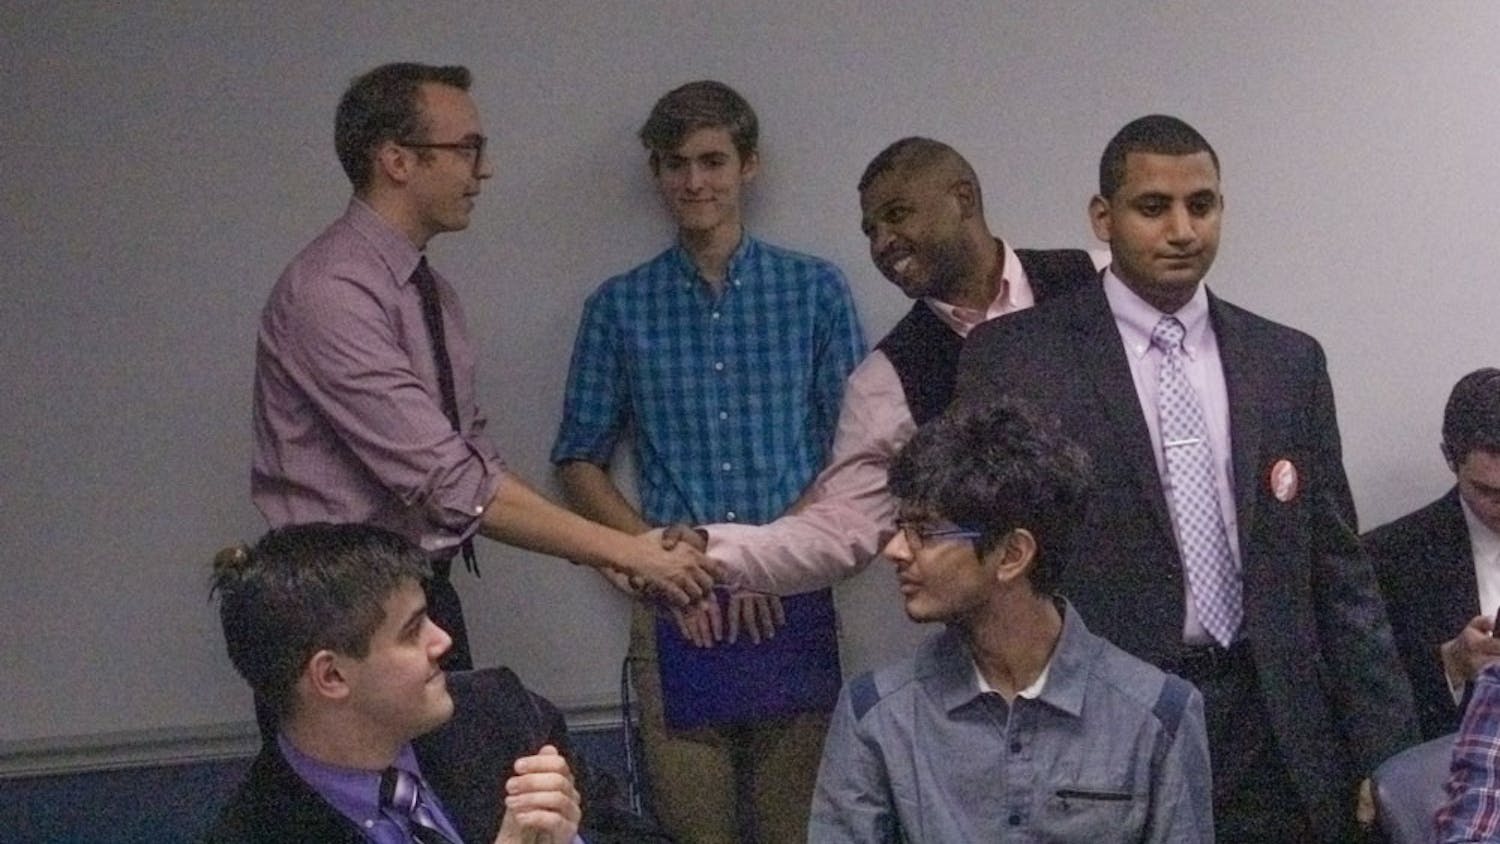 Newly elected Senate Chair Dillon Smith (standing far left) shakes hands with fellow candidate Carl Ross (middle) after winning the senate chair election, as losing candidate Yaser Soliman (far right) looks on in dismay. Soliman is challenging the results of the election.